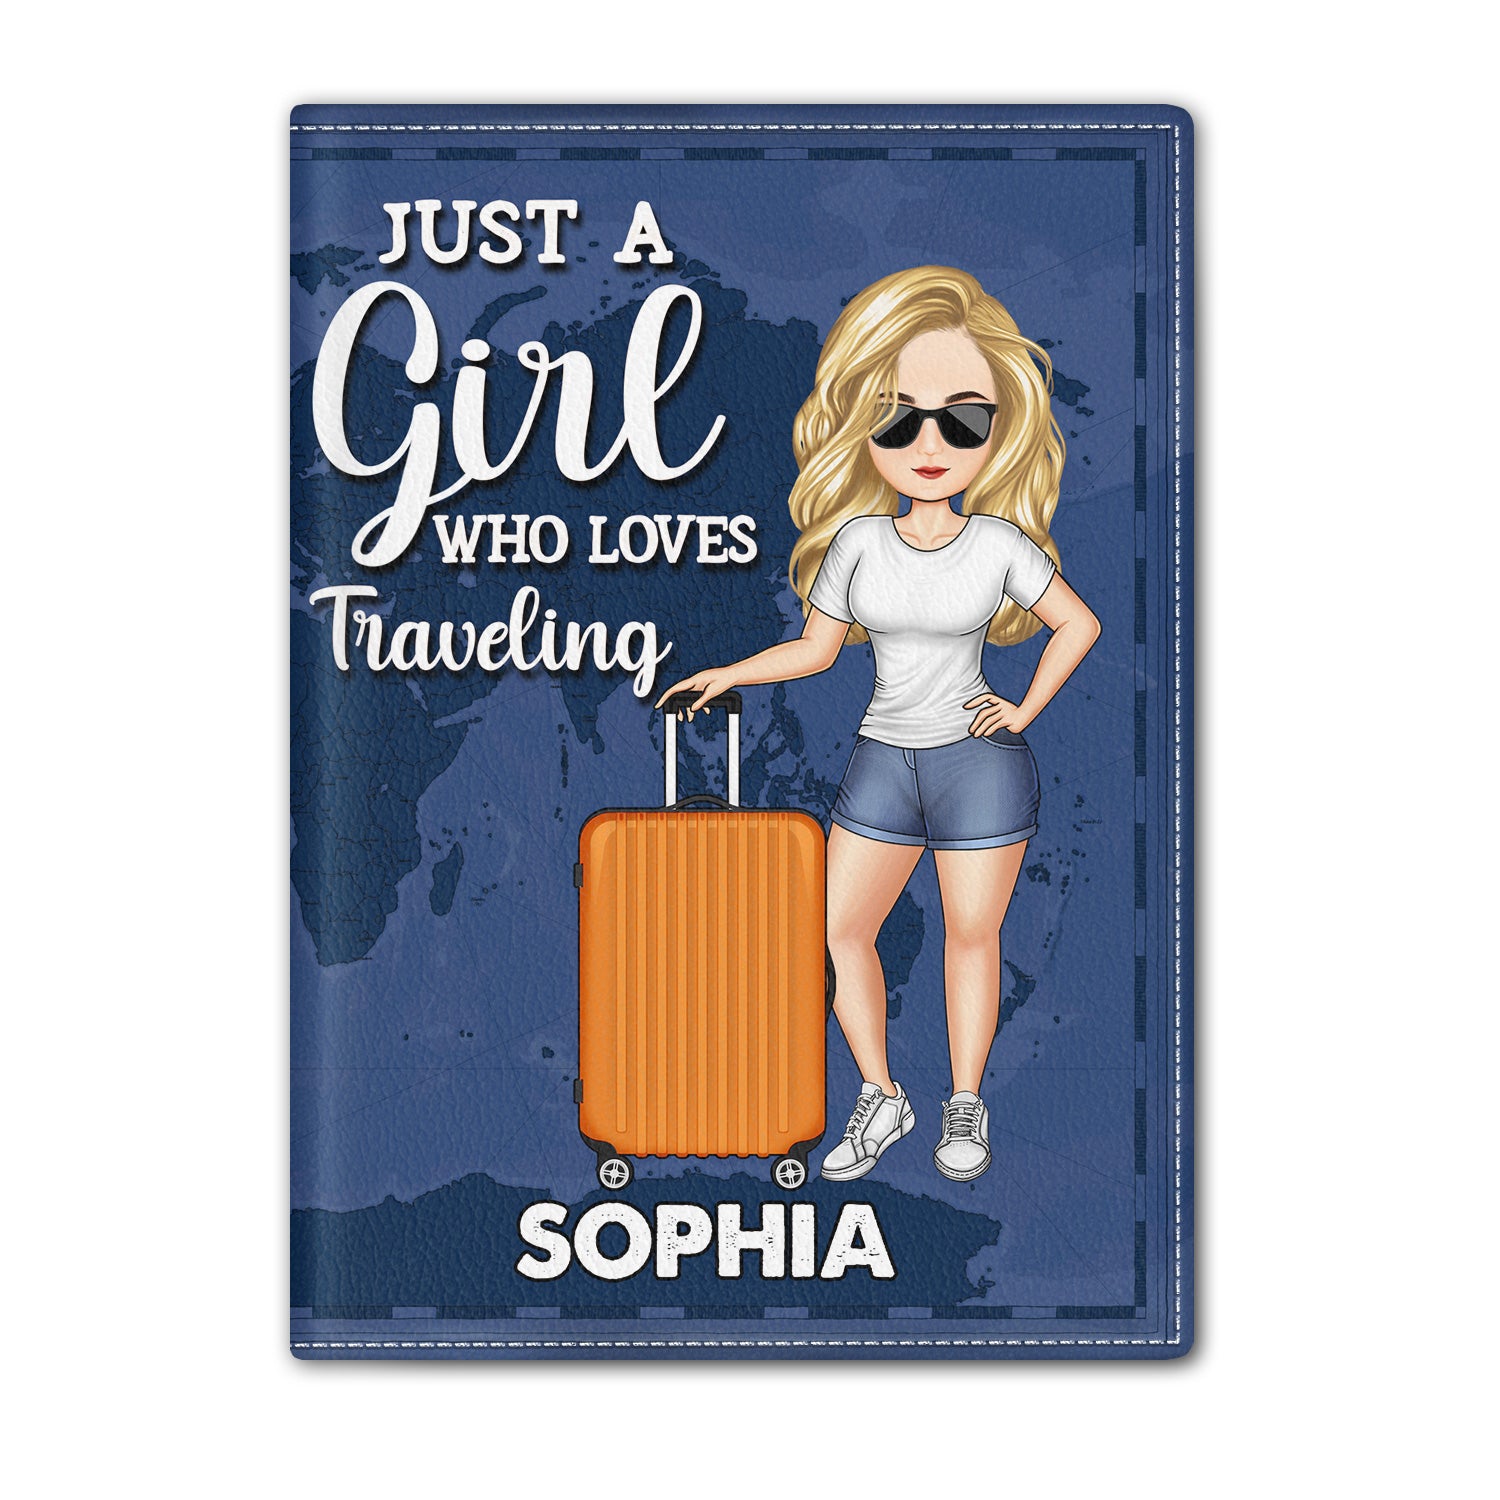 Just A Girl Who Loves Traveling - Vacation, Funny Gift For Her, Him, Travel Lovers - Personalized Custom Passport Cover, Passport Holder